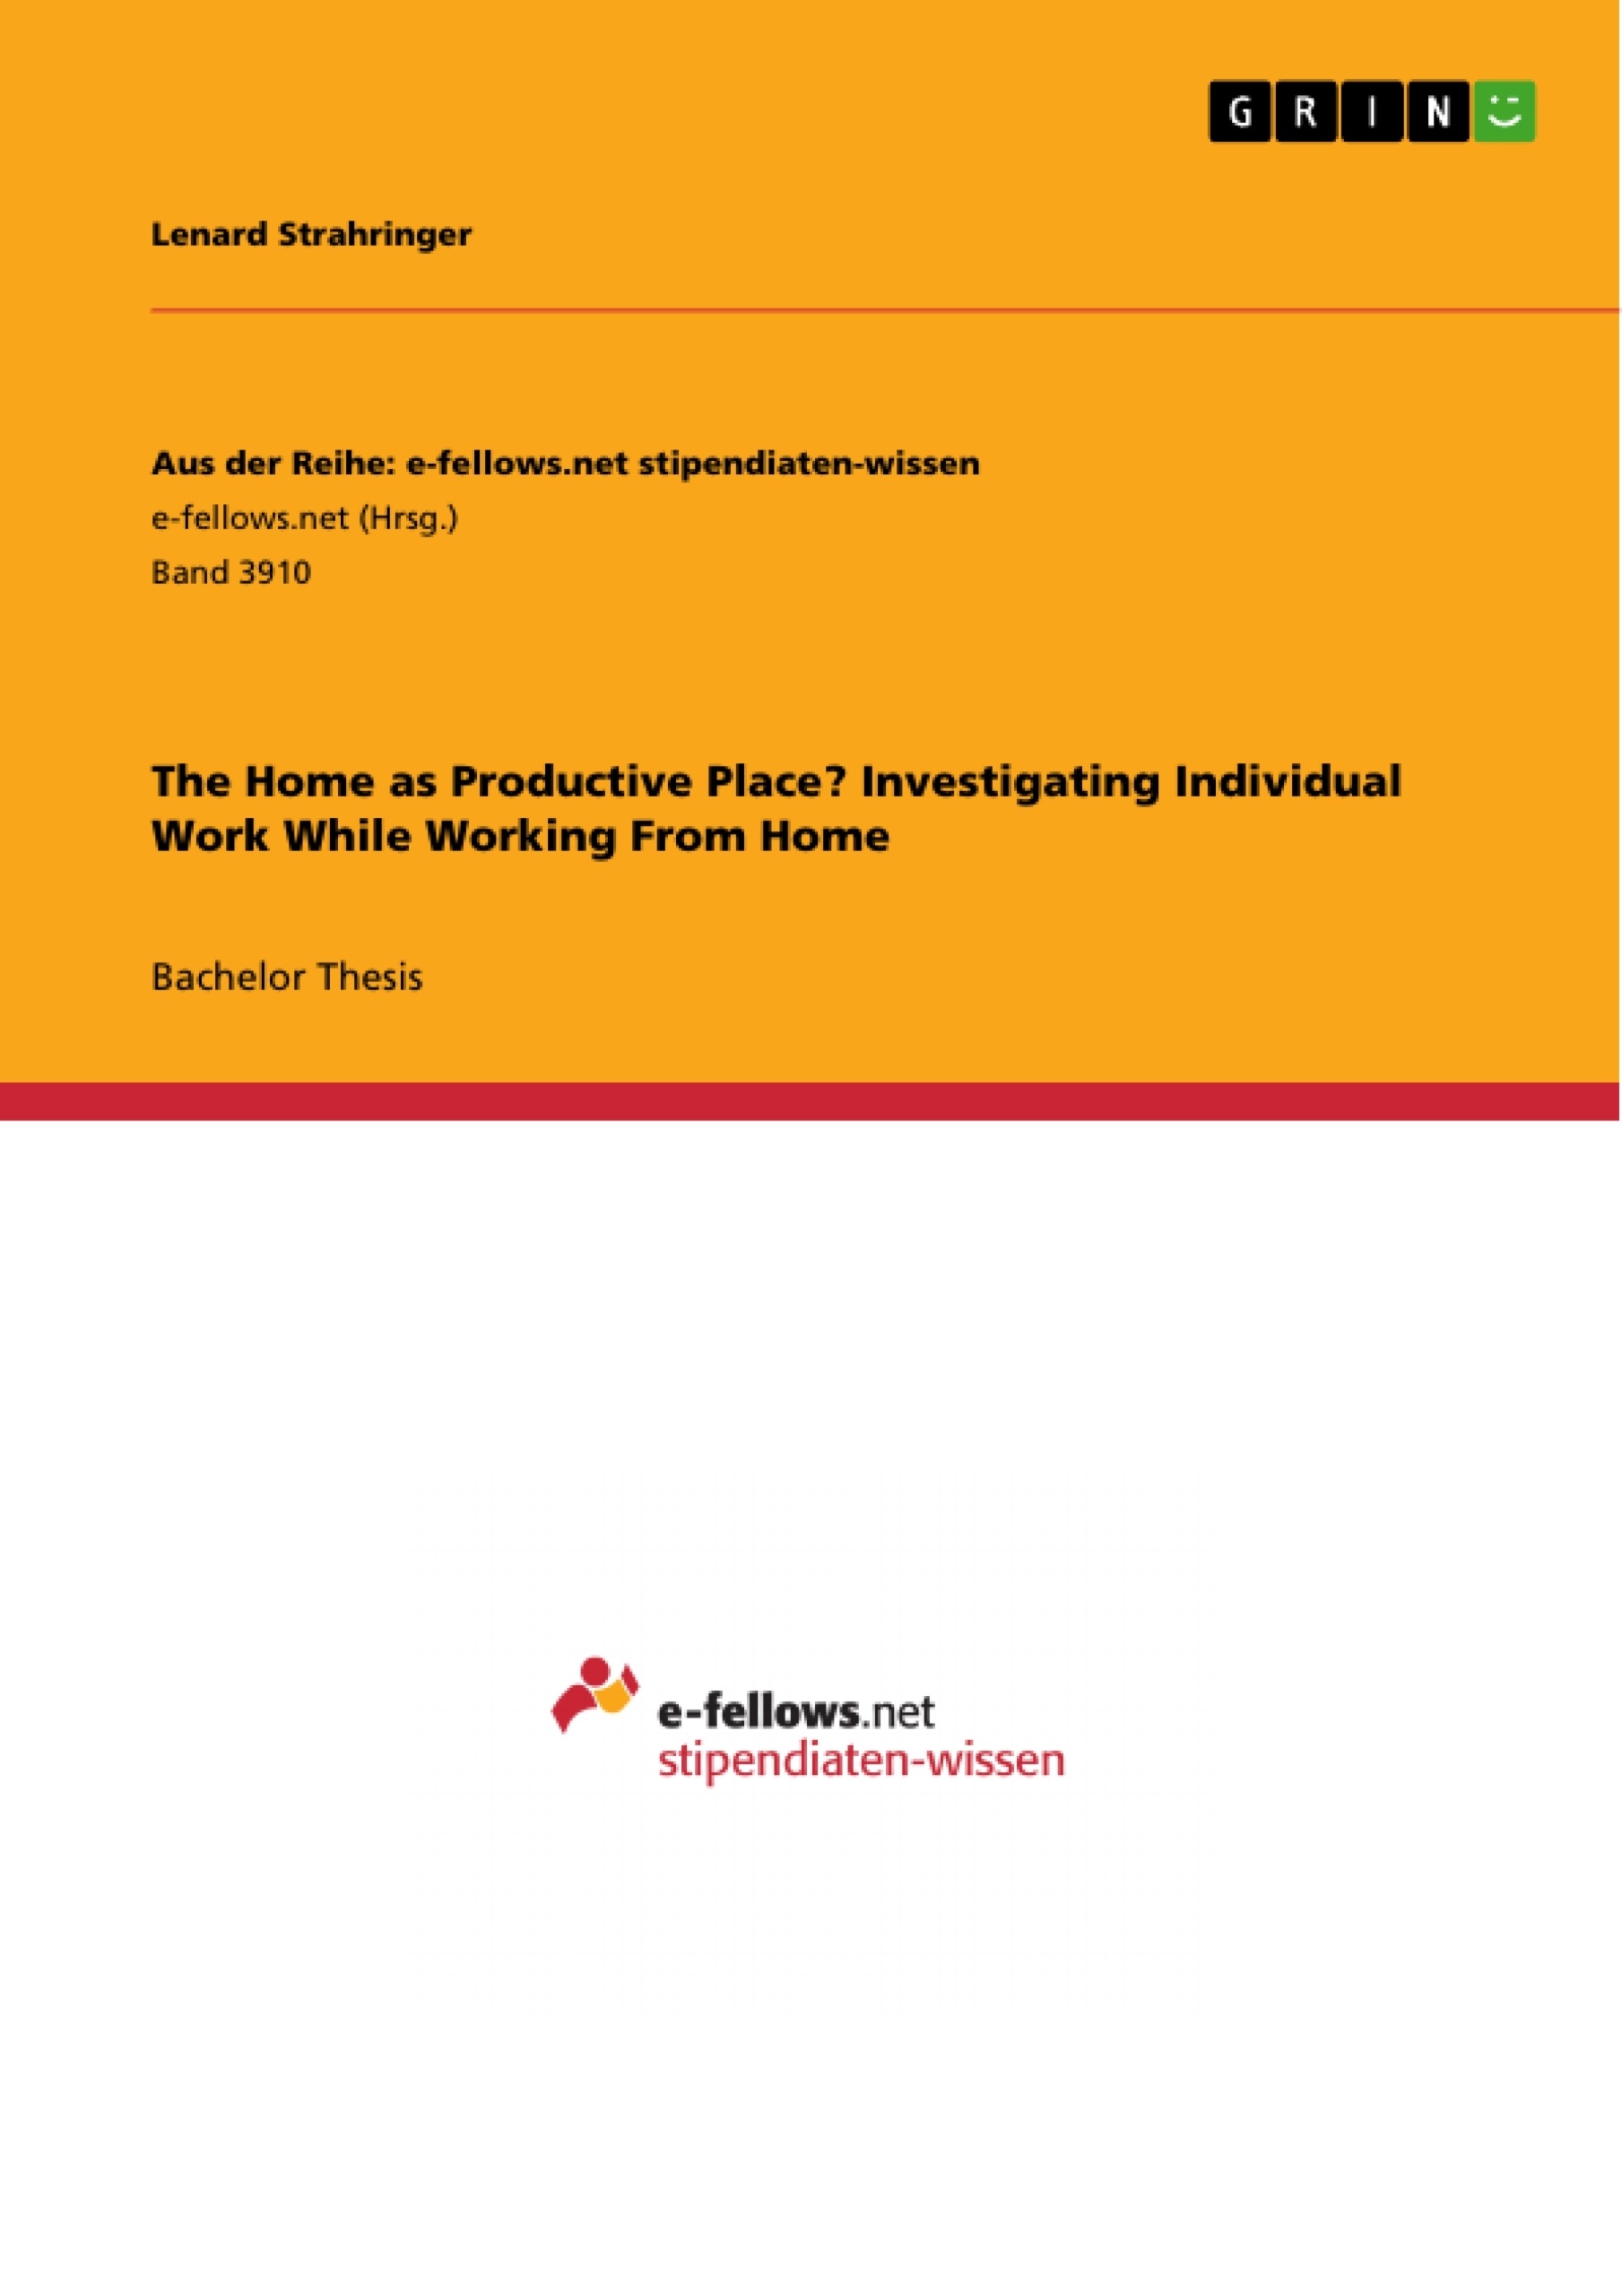 Title: The Home as Productive Place? Investigating Individual Work While Working From Home